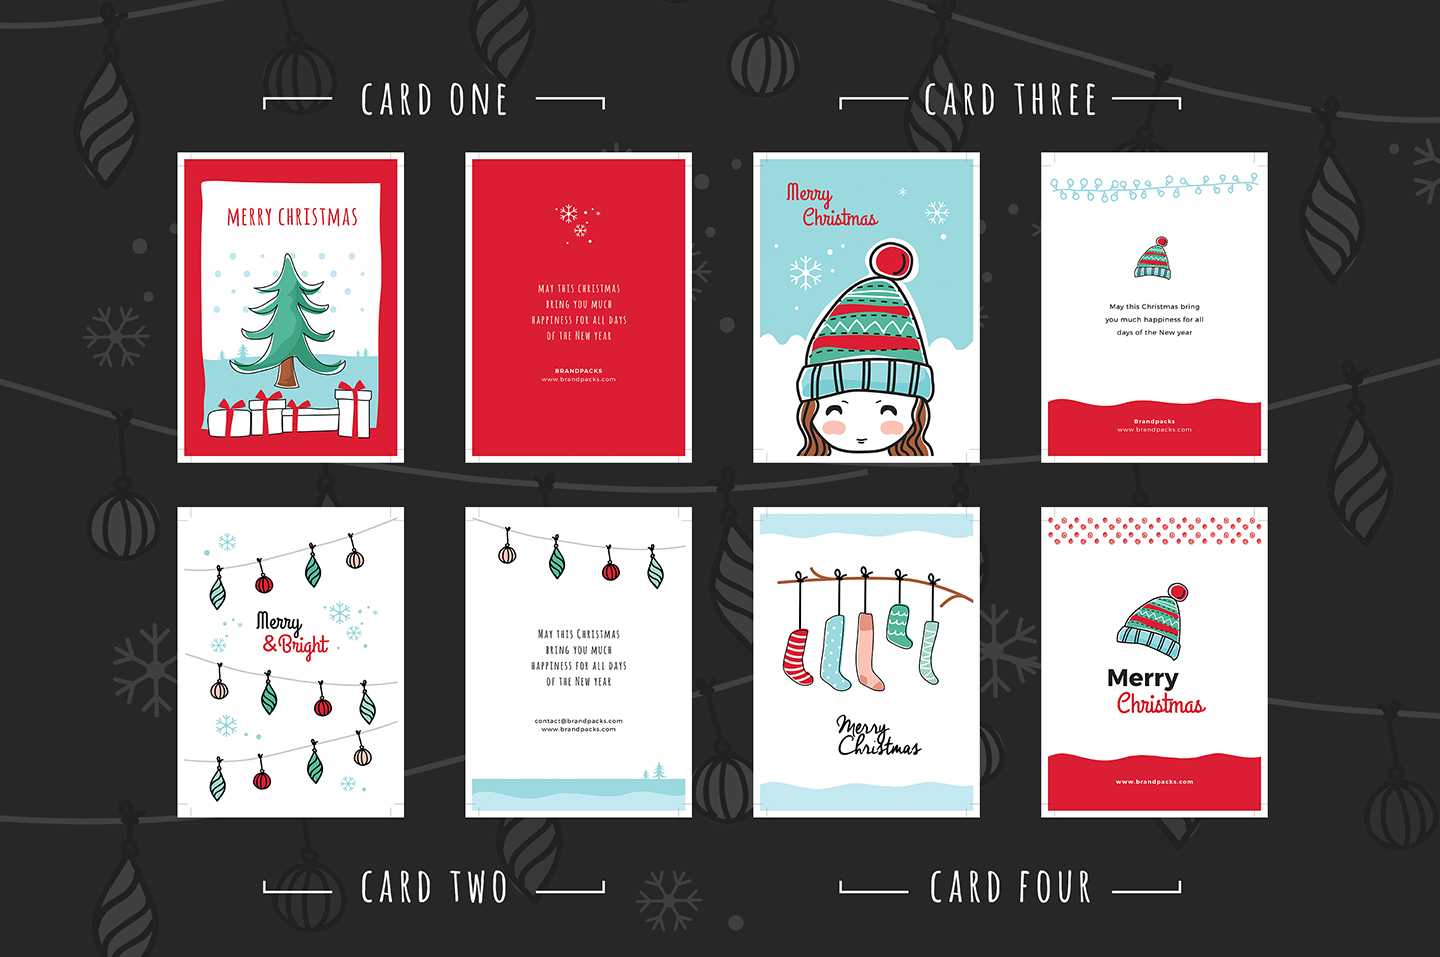 Free Christmas Card Templates For Photoshop & Illustrator Pertaining To Free Christmas Card Templates For Photoshop